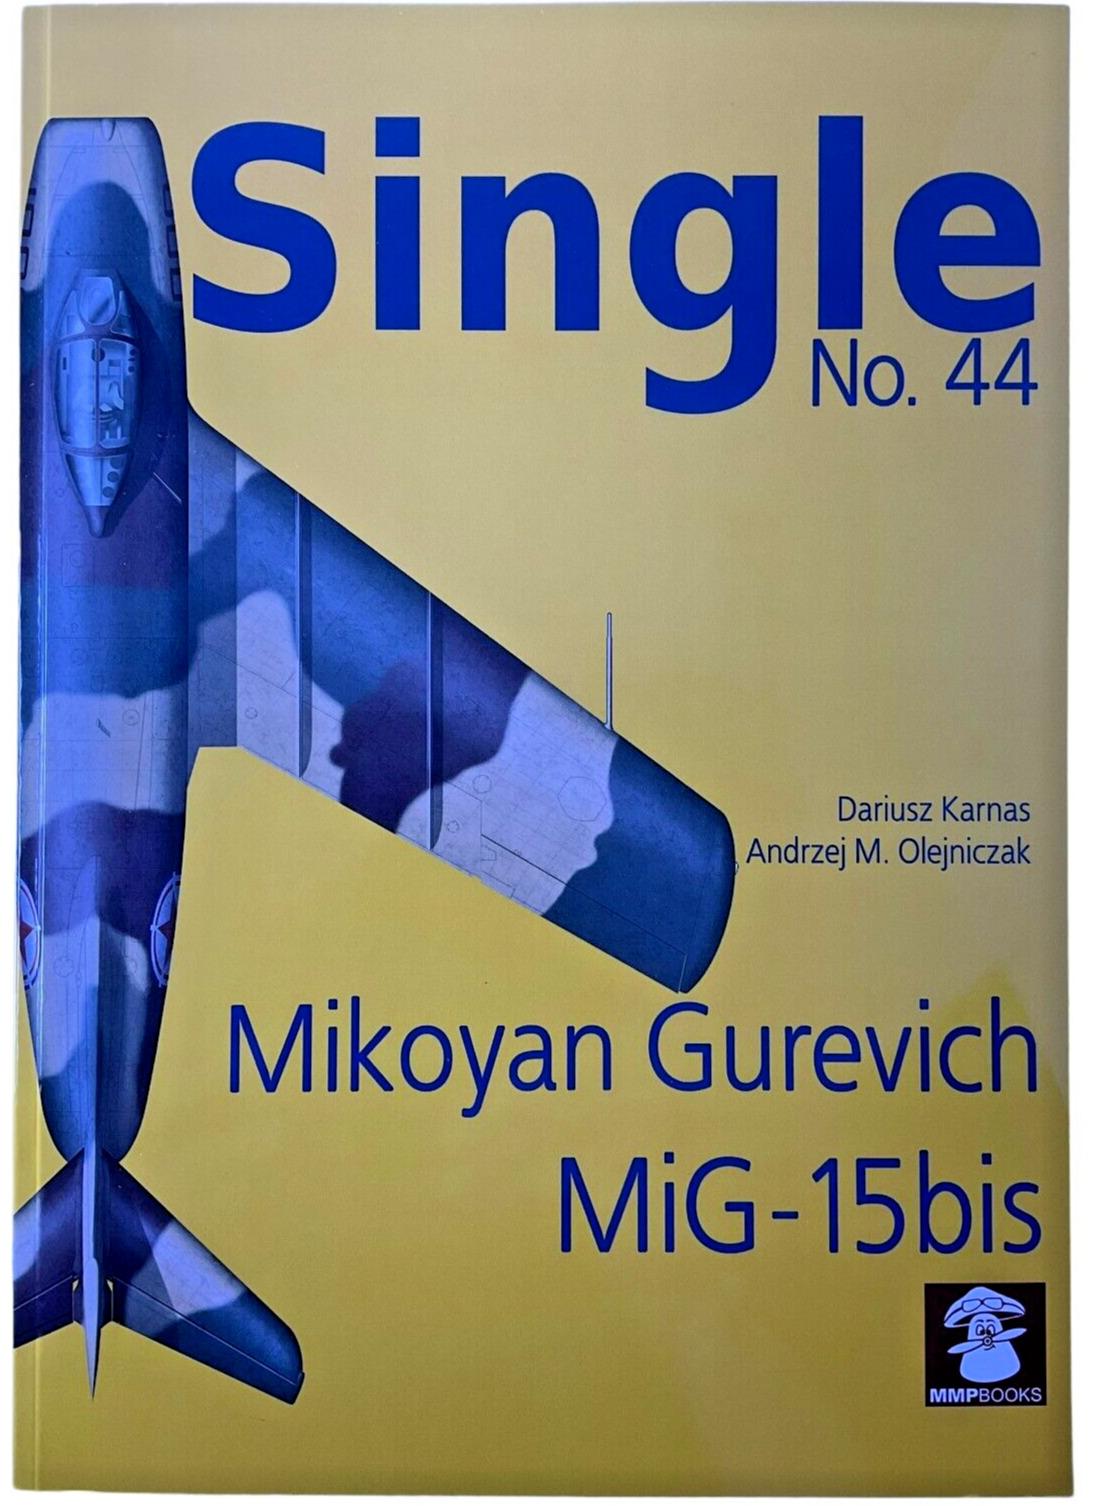 Russian Soviet Mikoyan Gurevich MiG 15bis Single No 44 Softcover Reference Book